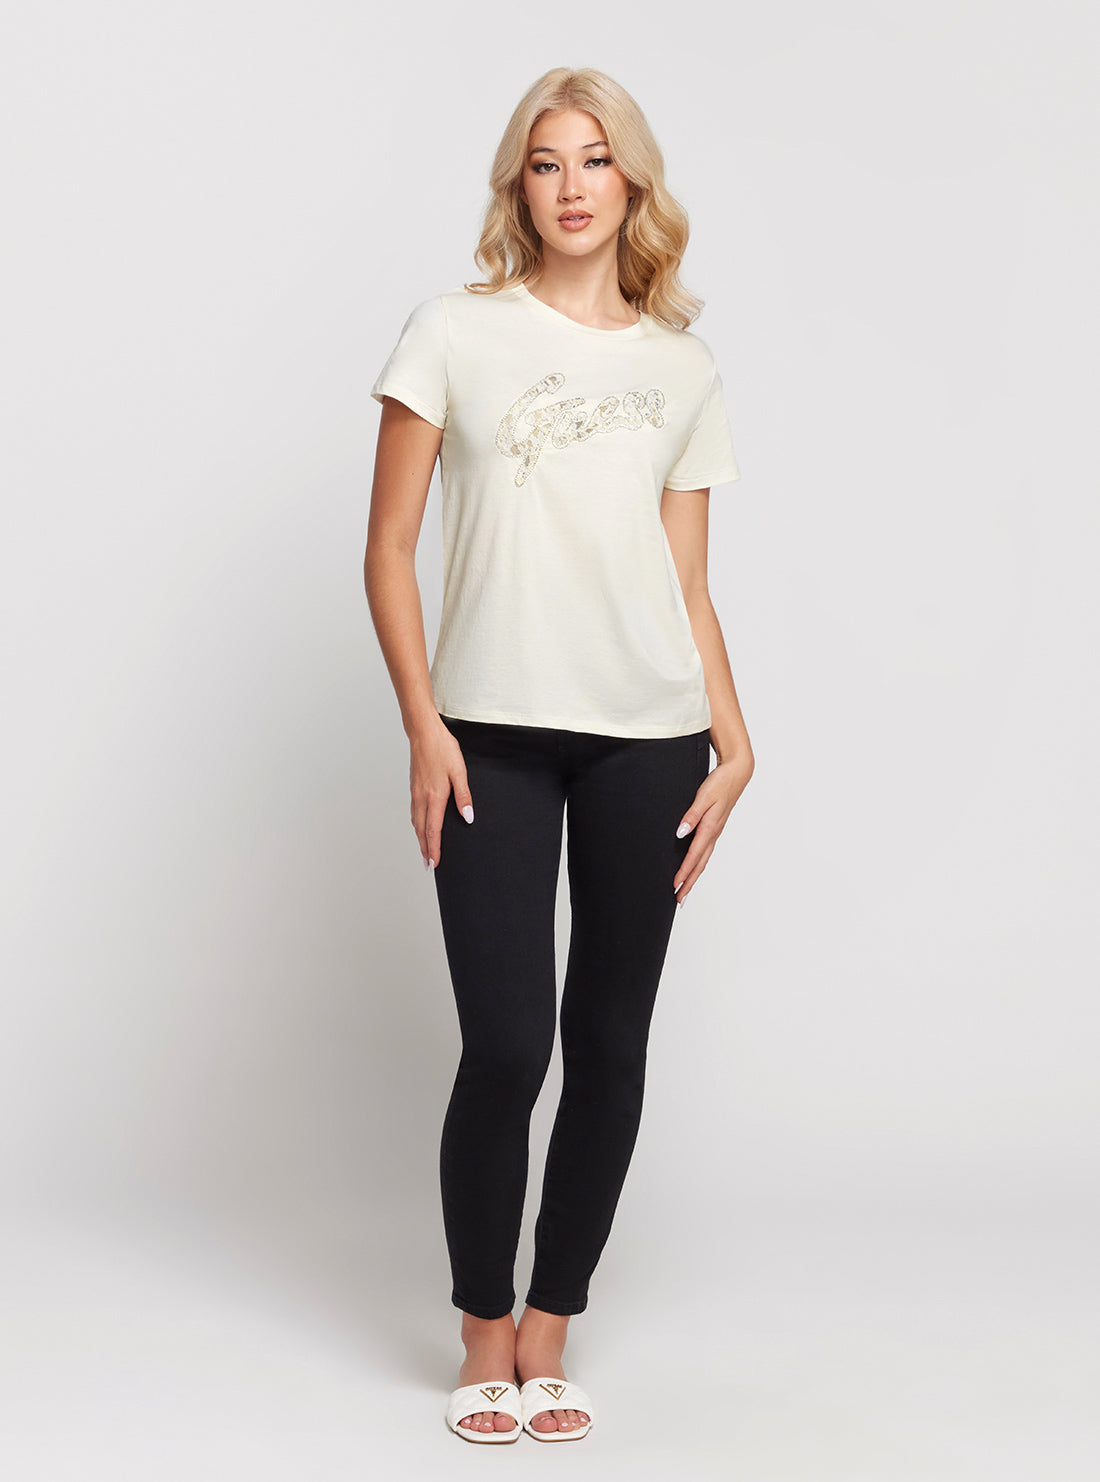 GUESS Cream Short Sleeves Lace Logo T-Shirt full view